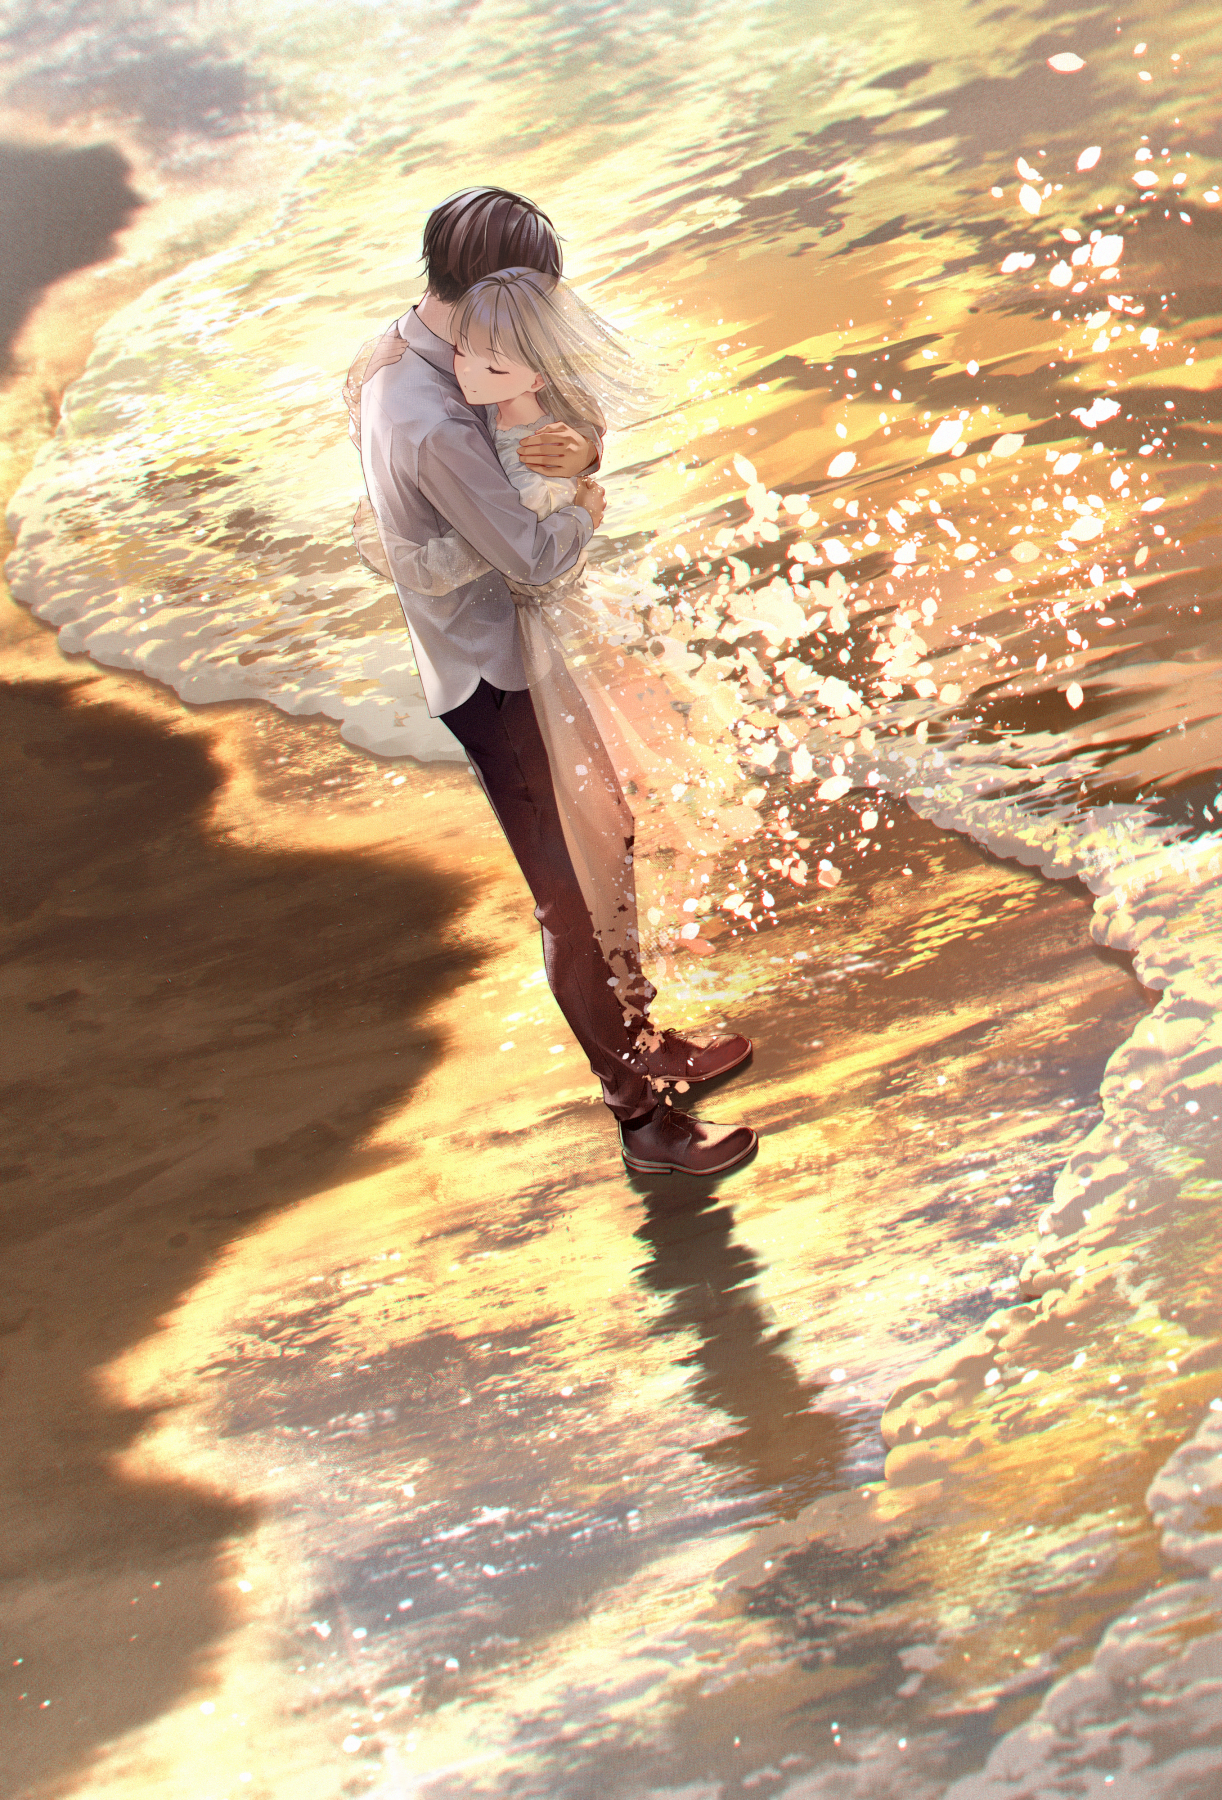 Anime 1222x1800 Sawasawa portrait display beach closed eyes couple hugging water waves ghost sunset sea dress wind floating particles standing smiling